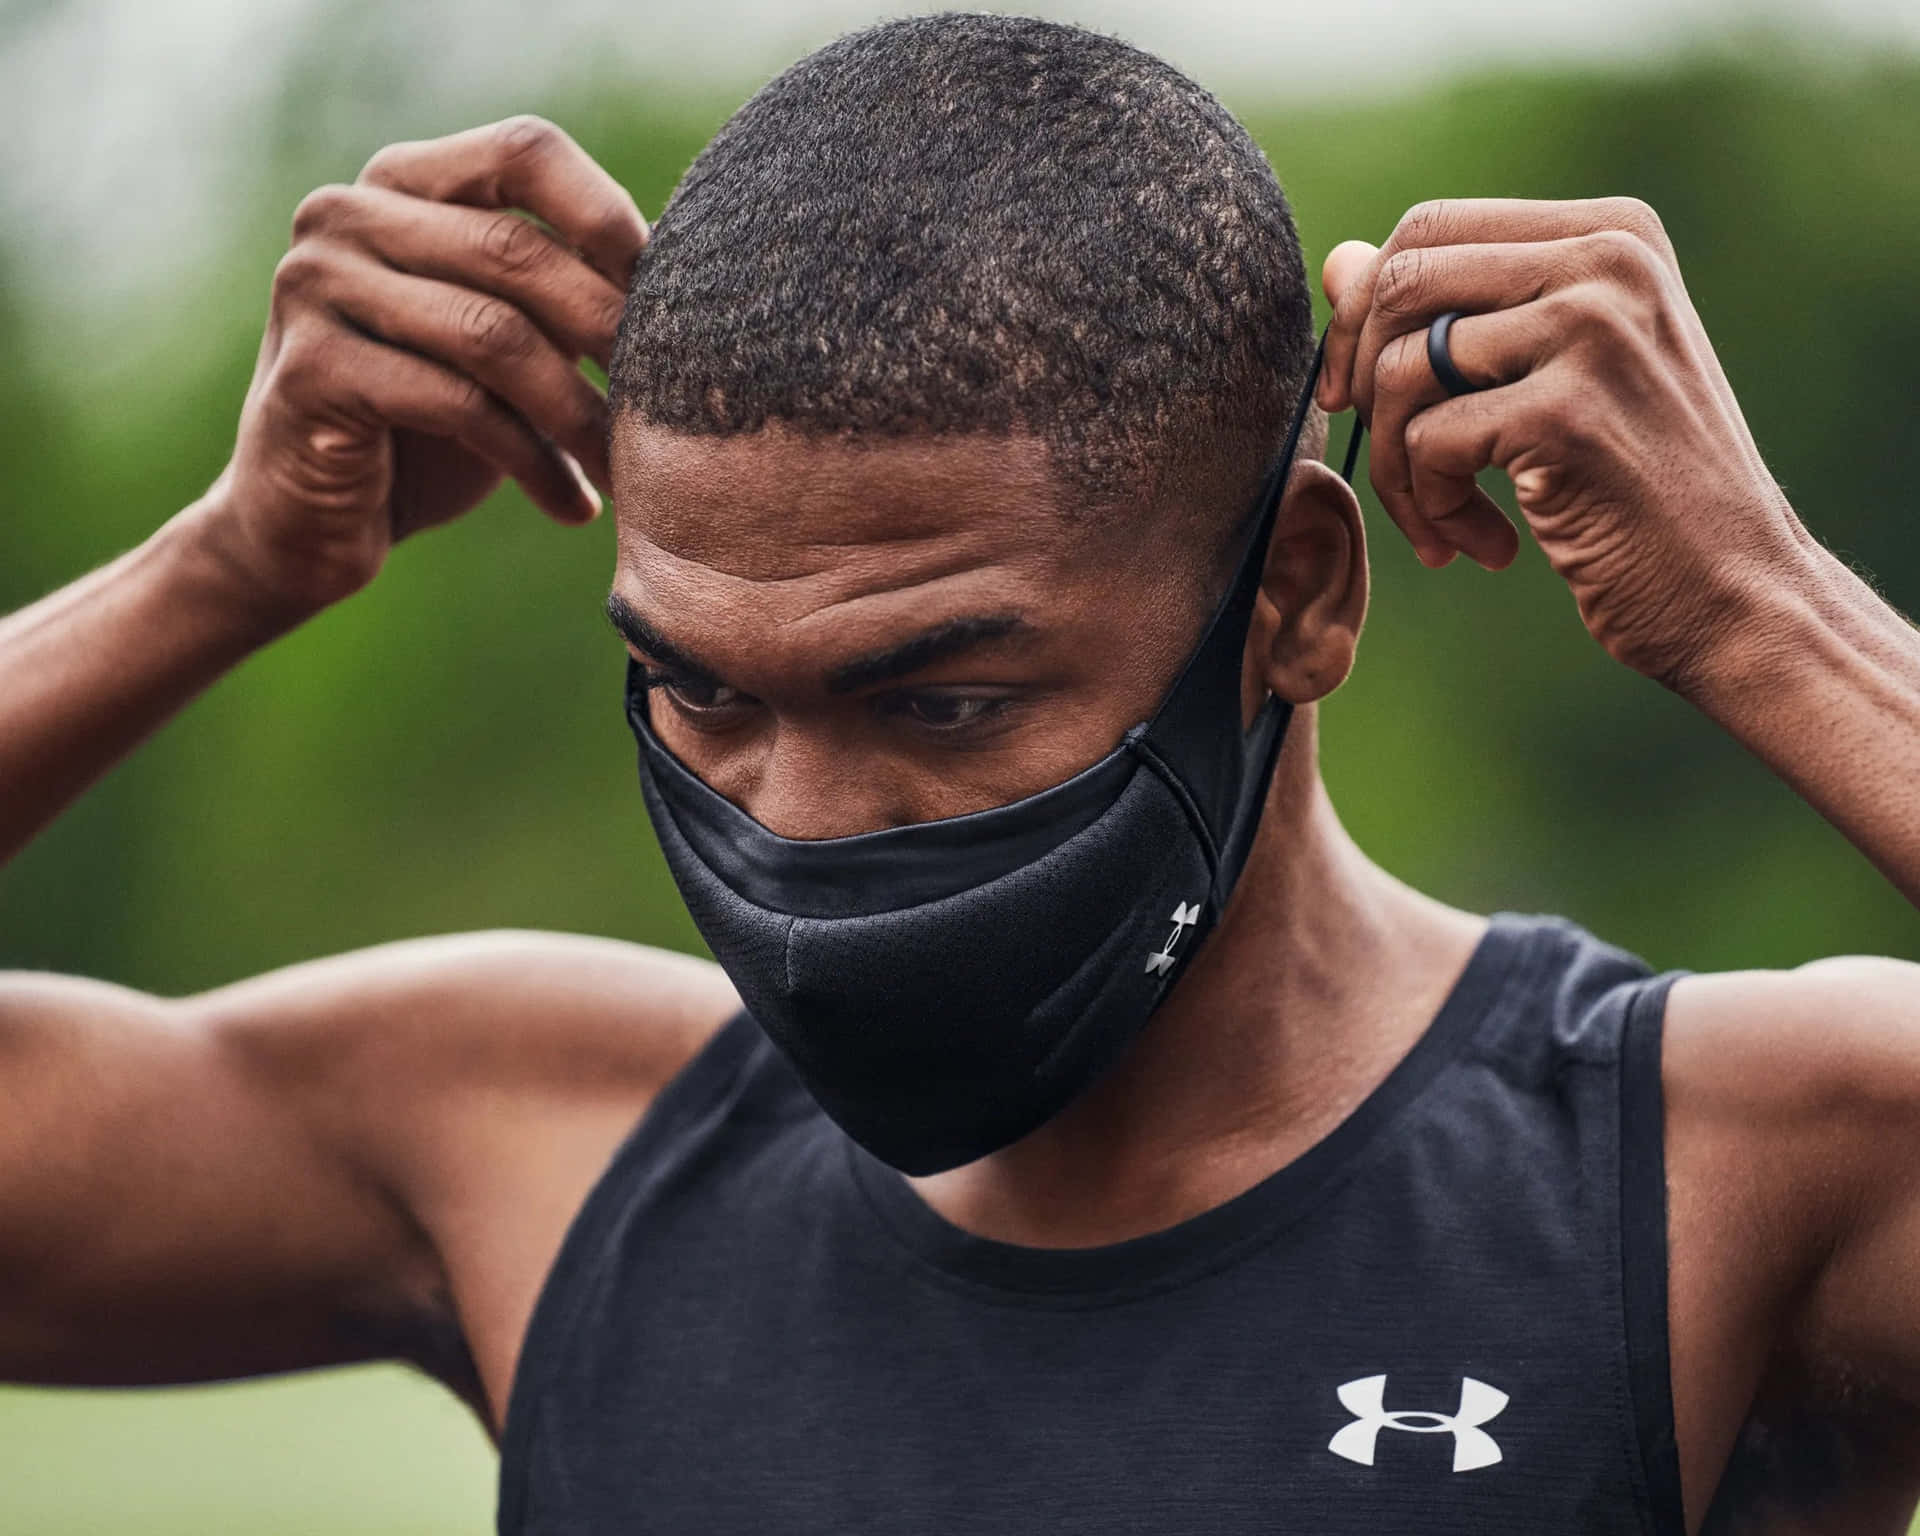 Get active in style with Under Armour